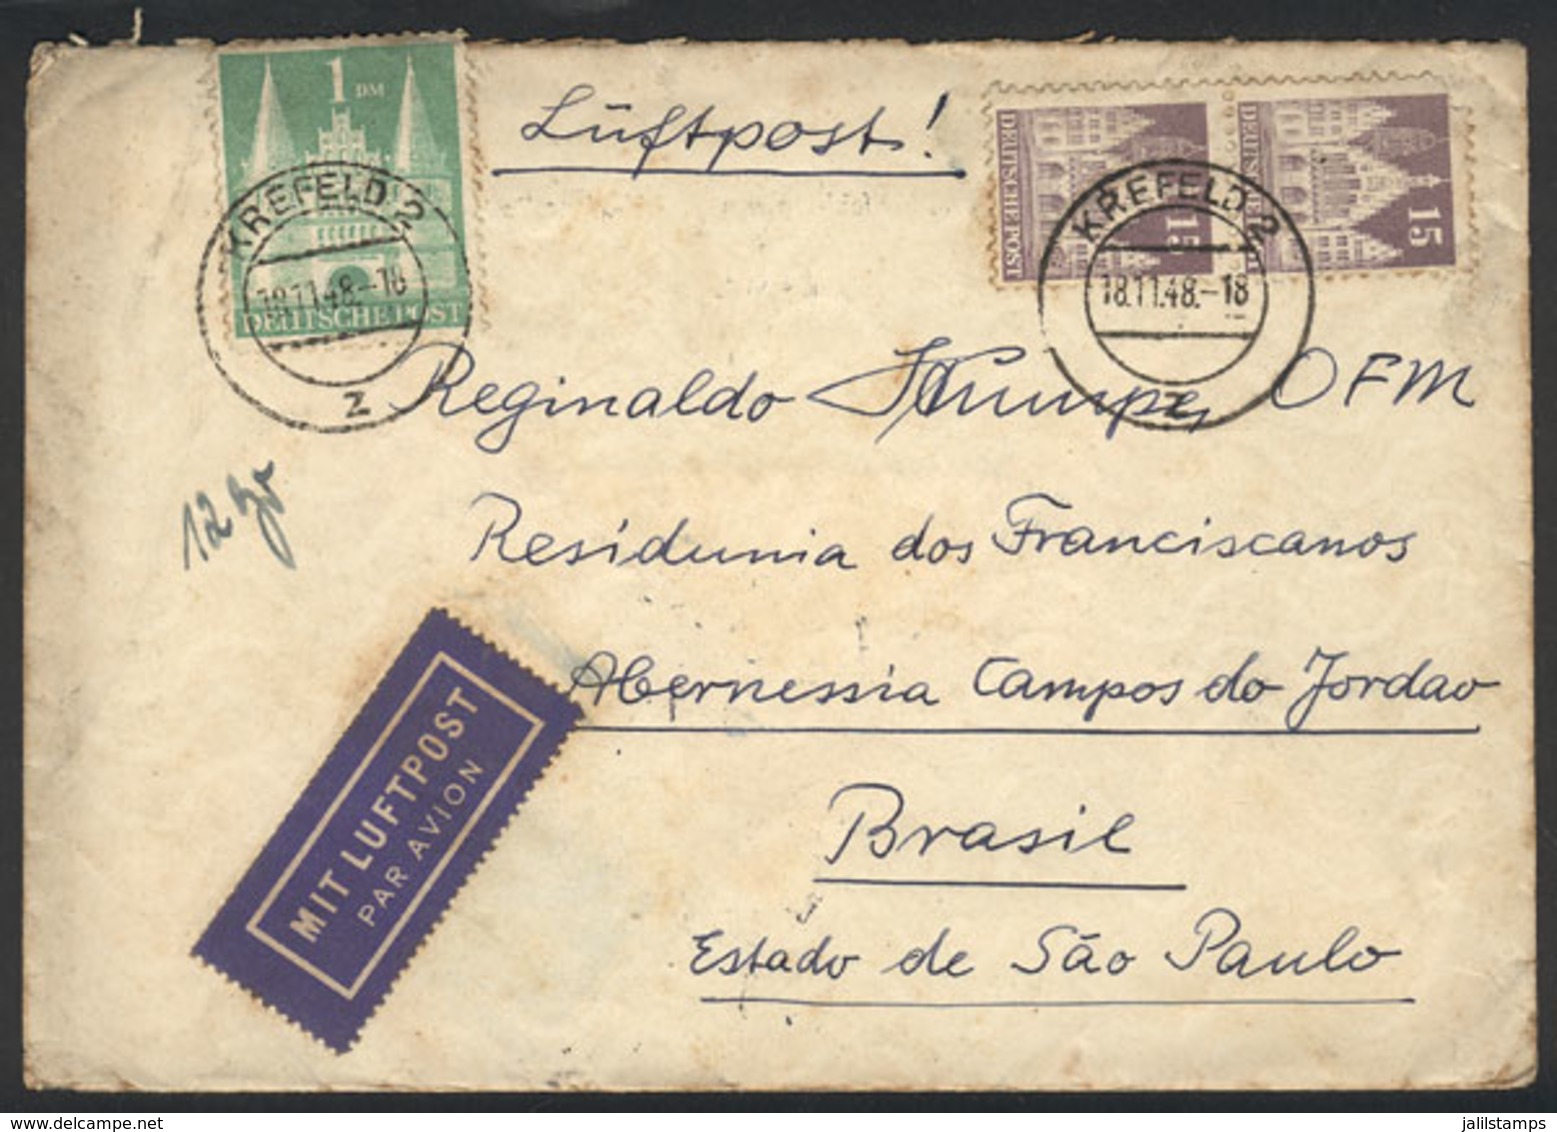 GERMANY: Airmail Cover Sent From Krefeld To Brazil On 18/NO/1948 Franked With 1.30Dm., Interesting! - [Voorlopers